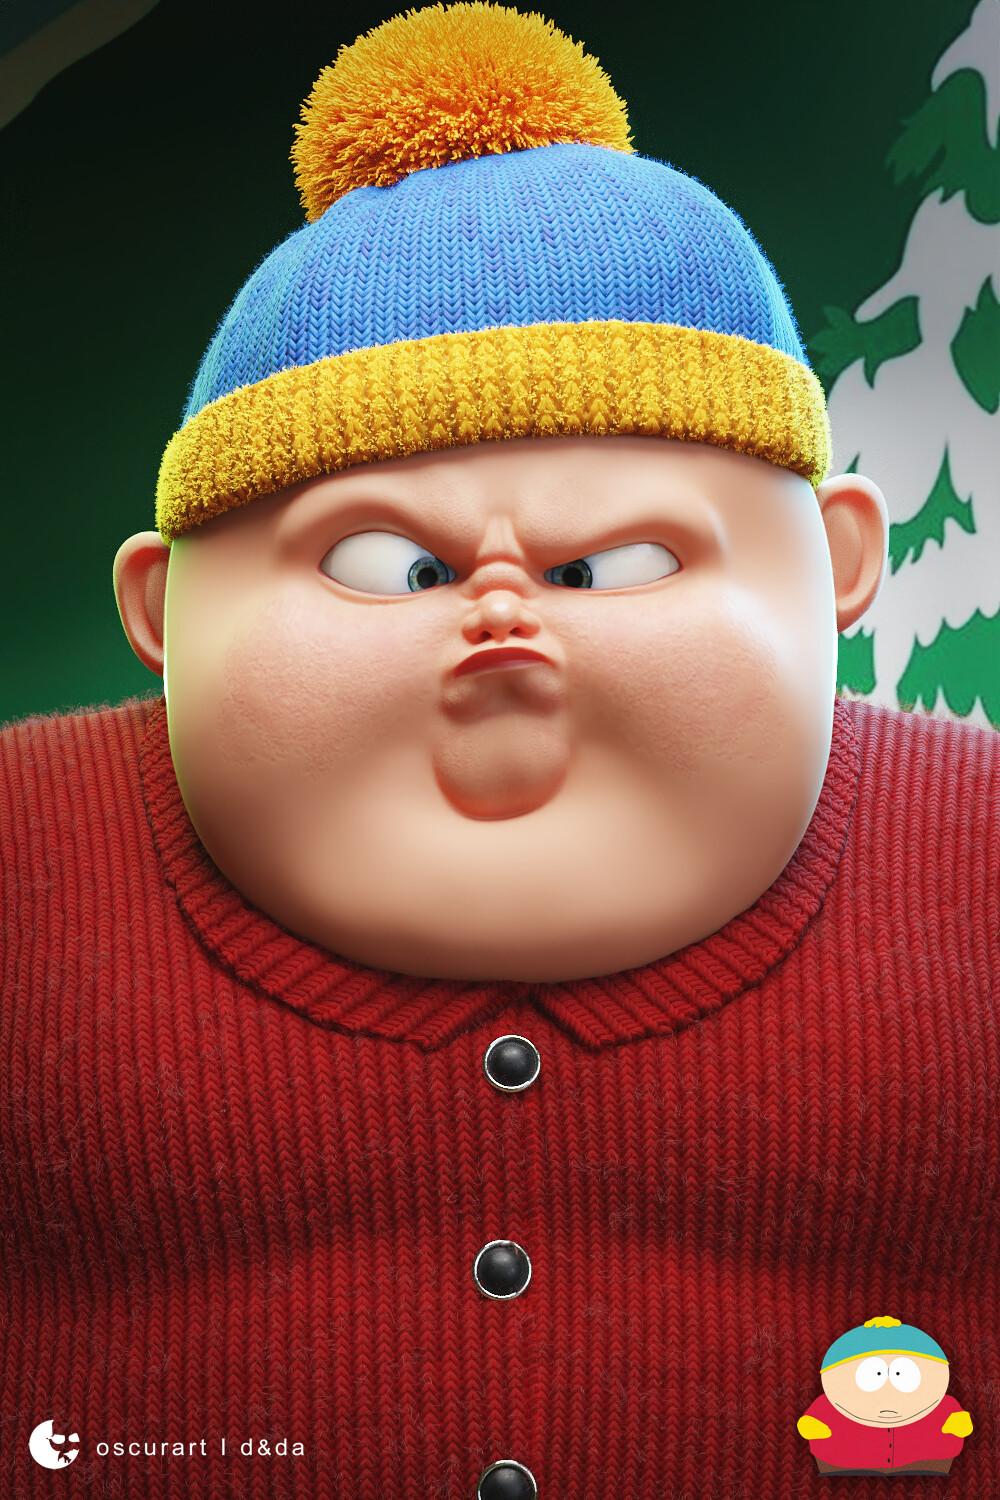 pics of cartman from south park